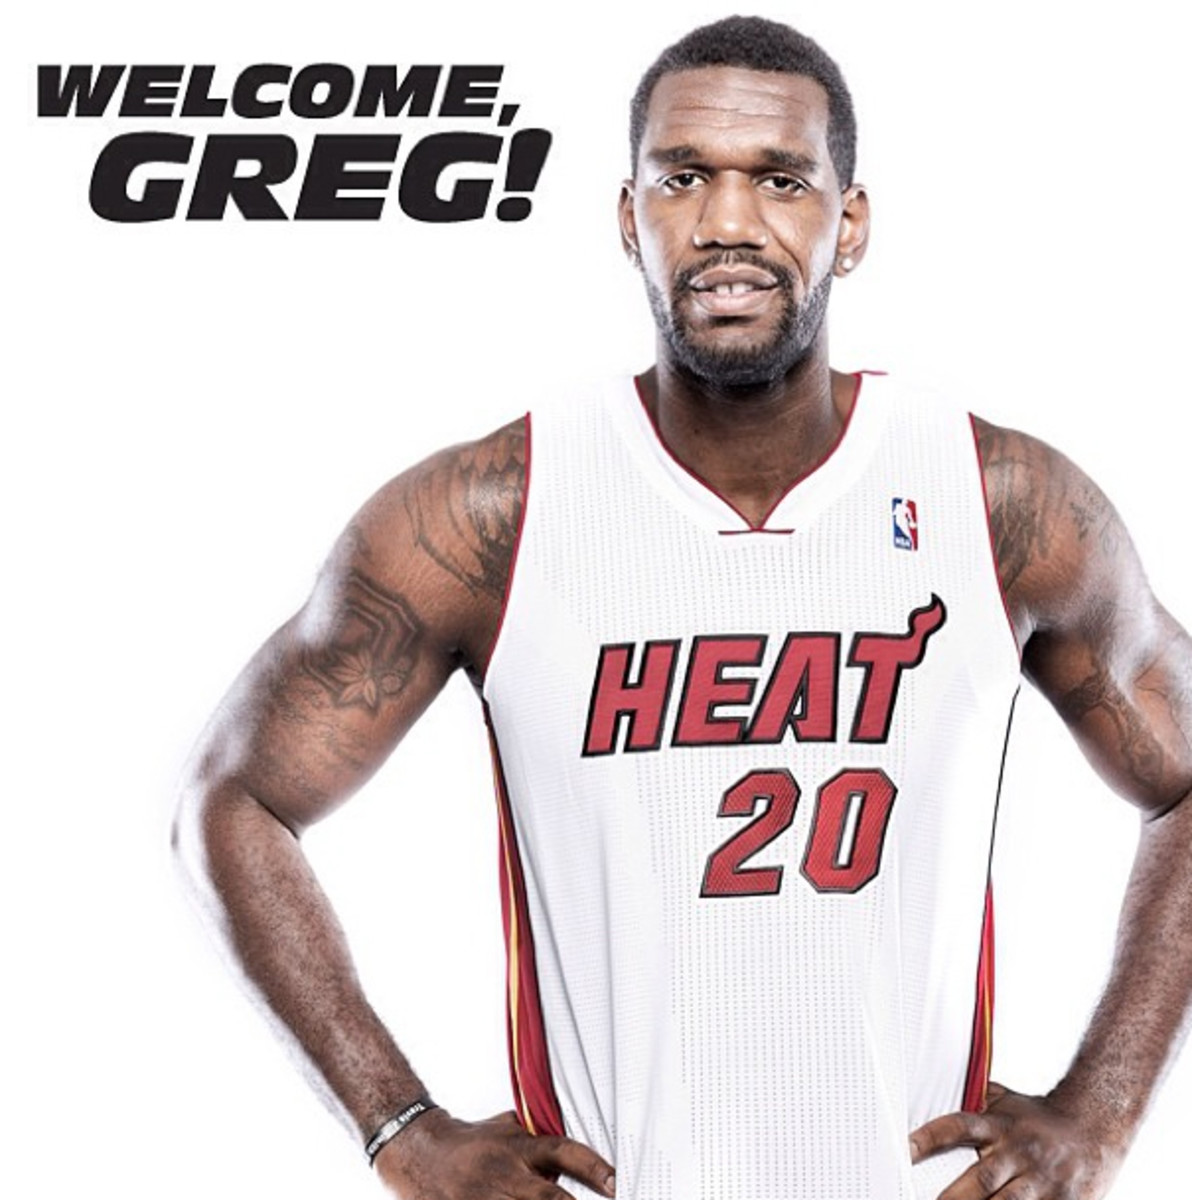 Greg Oden hasn't appeared in an NBA game since Dec. 5, 2009. (@MiamiHeat)